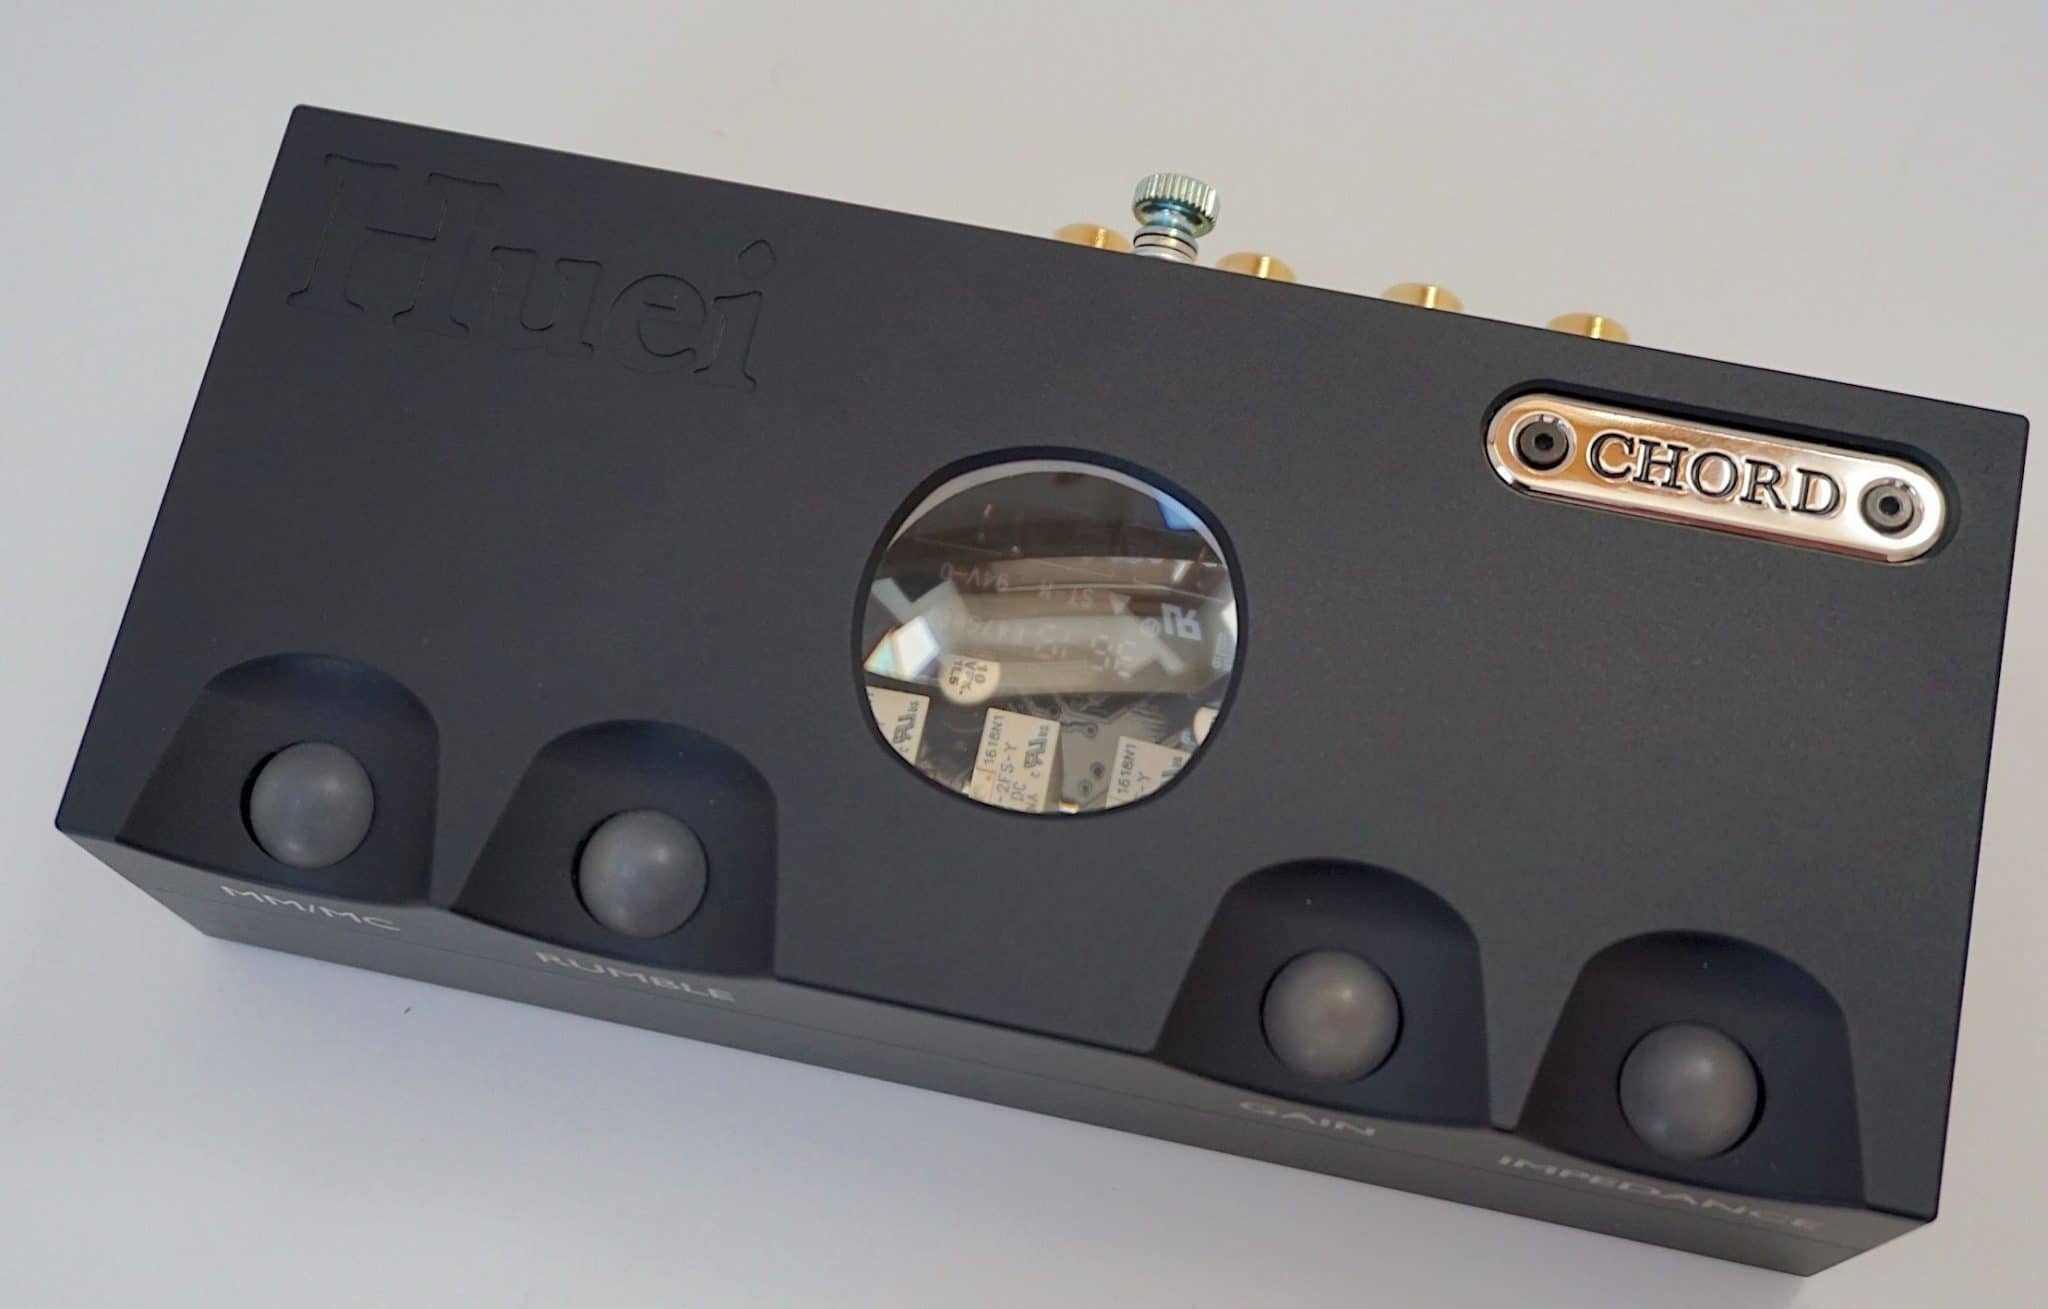 Huei Phono Amplifier from Chord